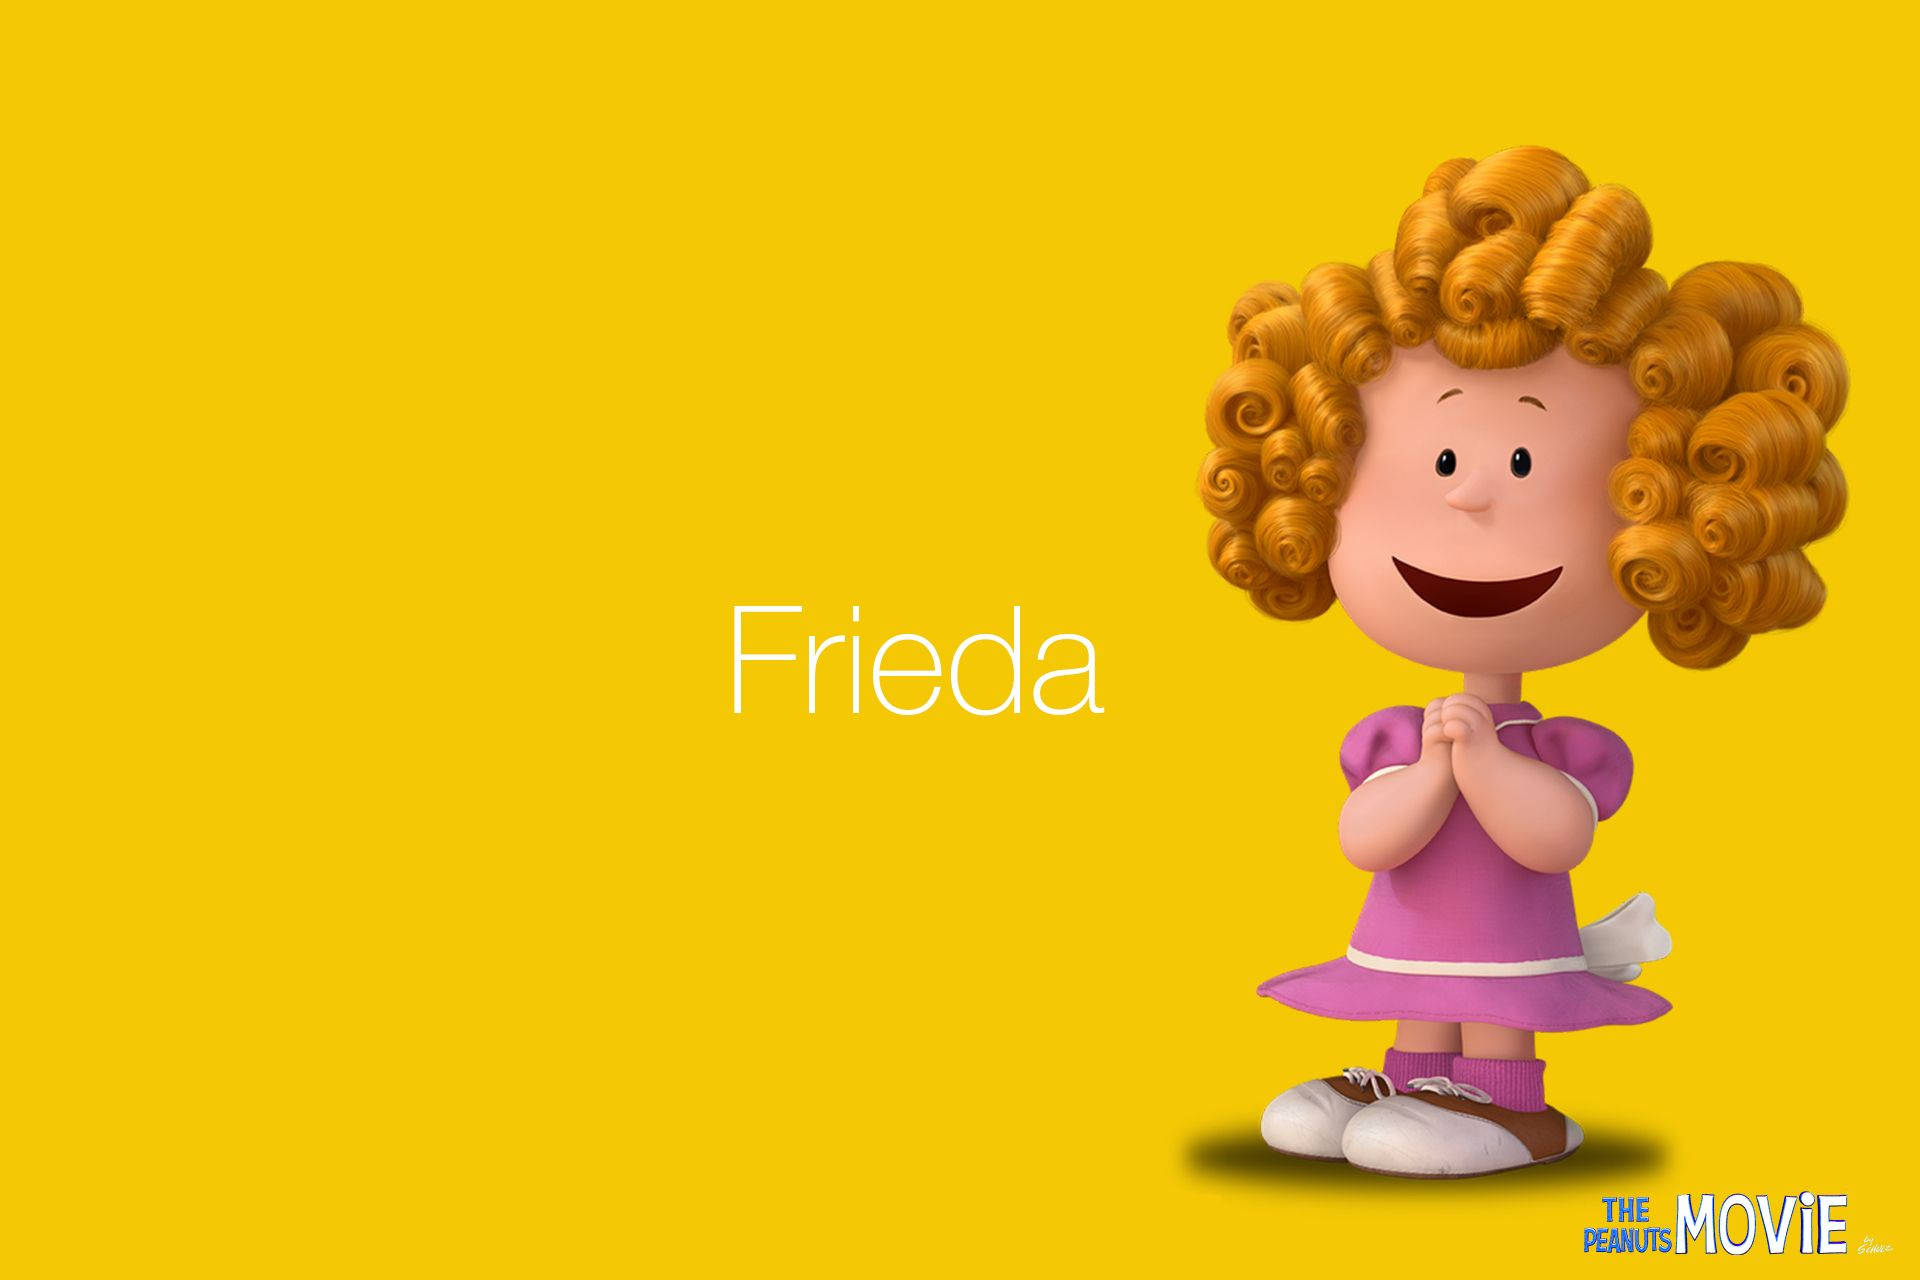 Frieda From The Peanuts Movie Smiling Energetically Background